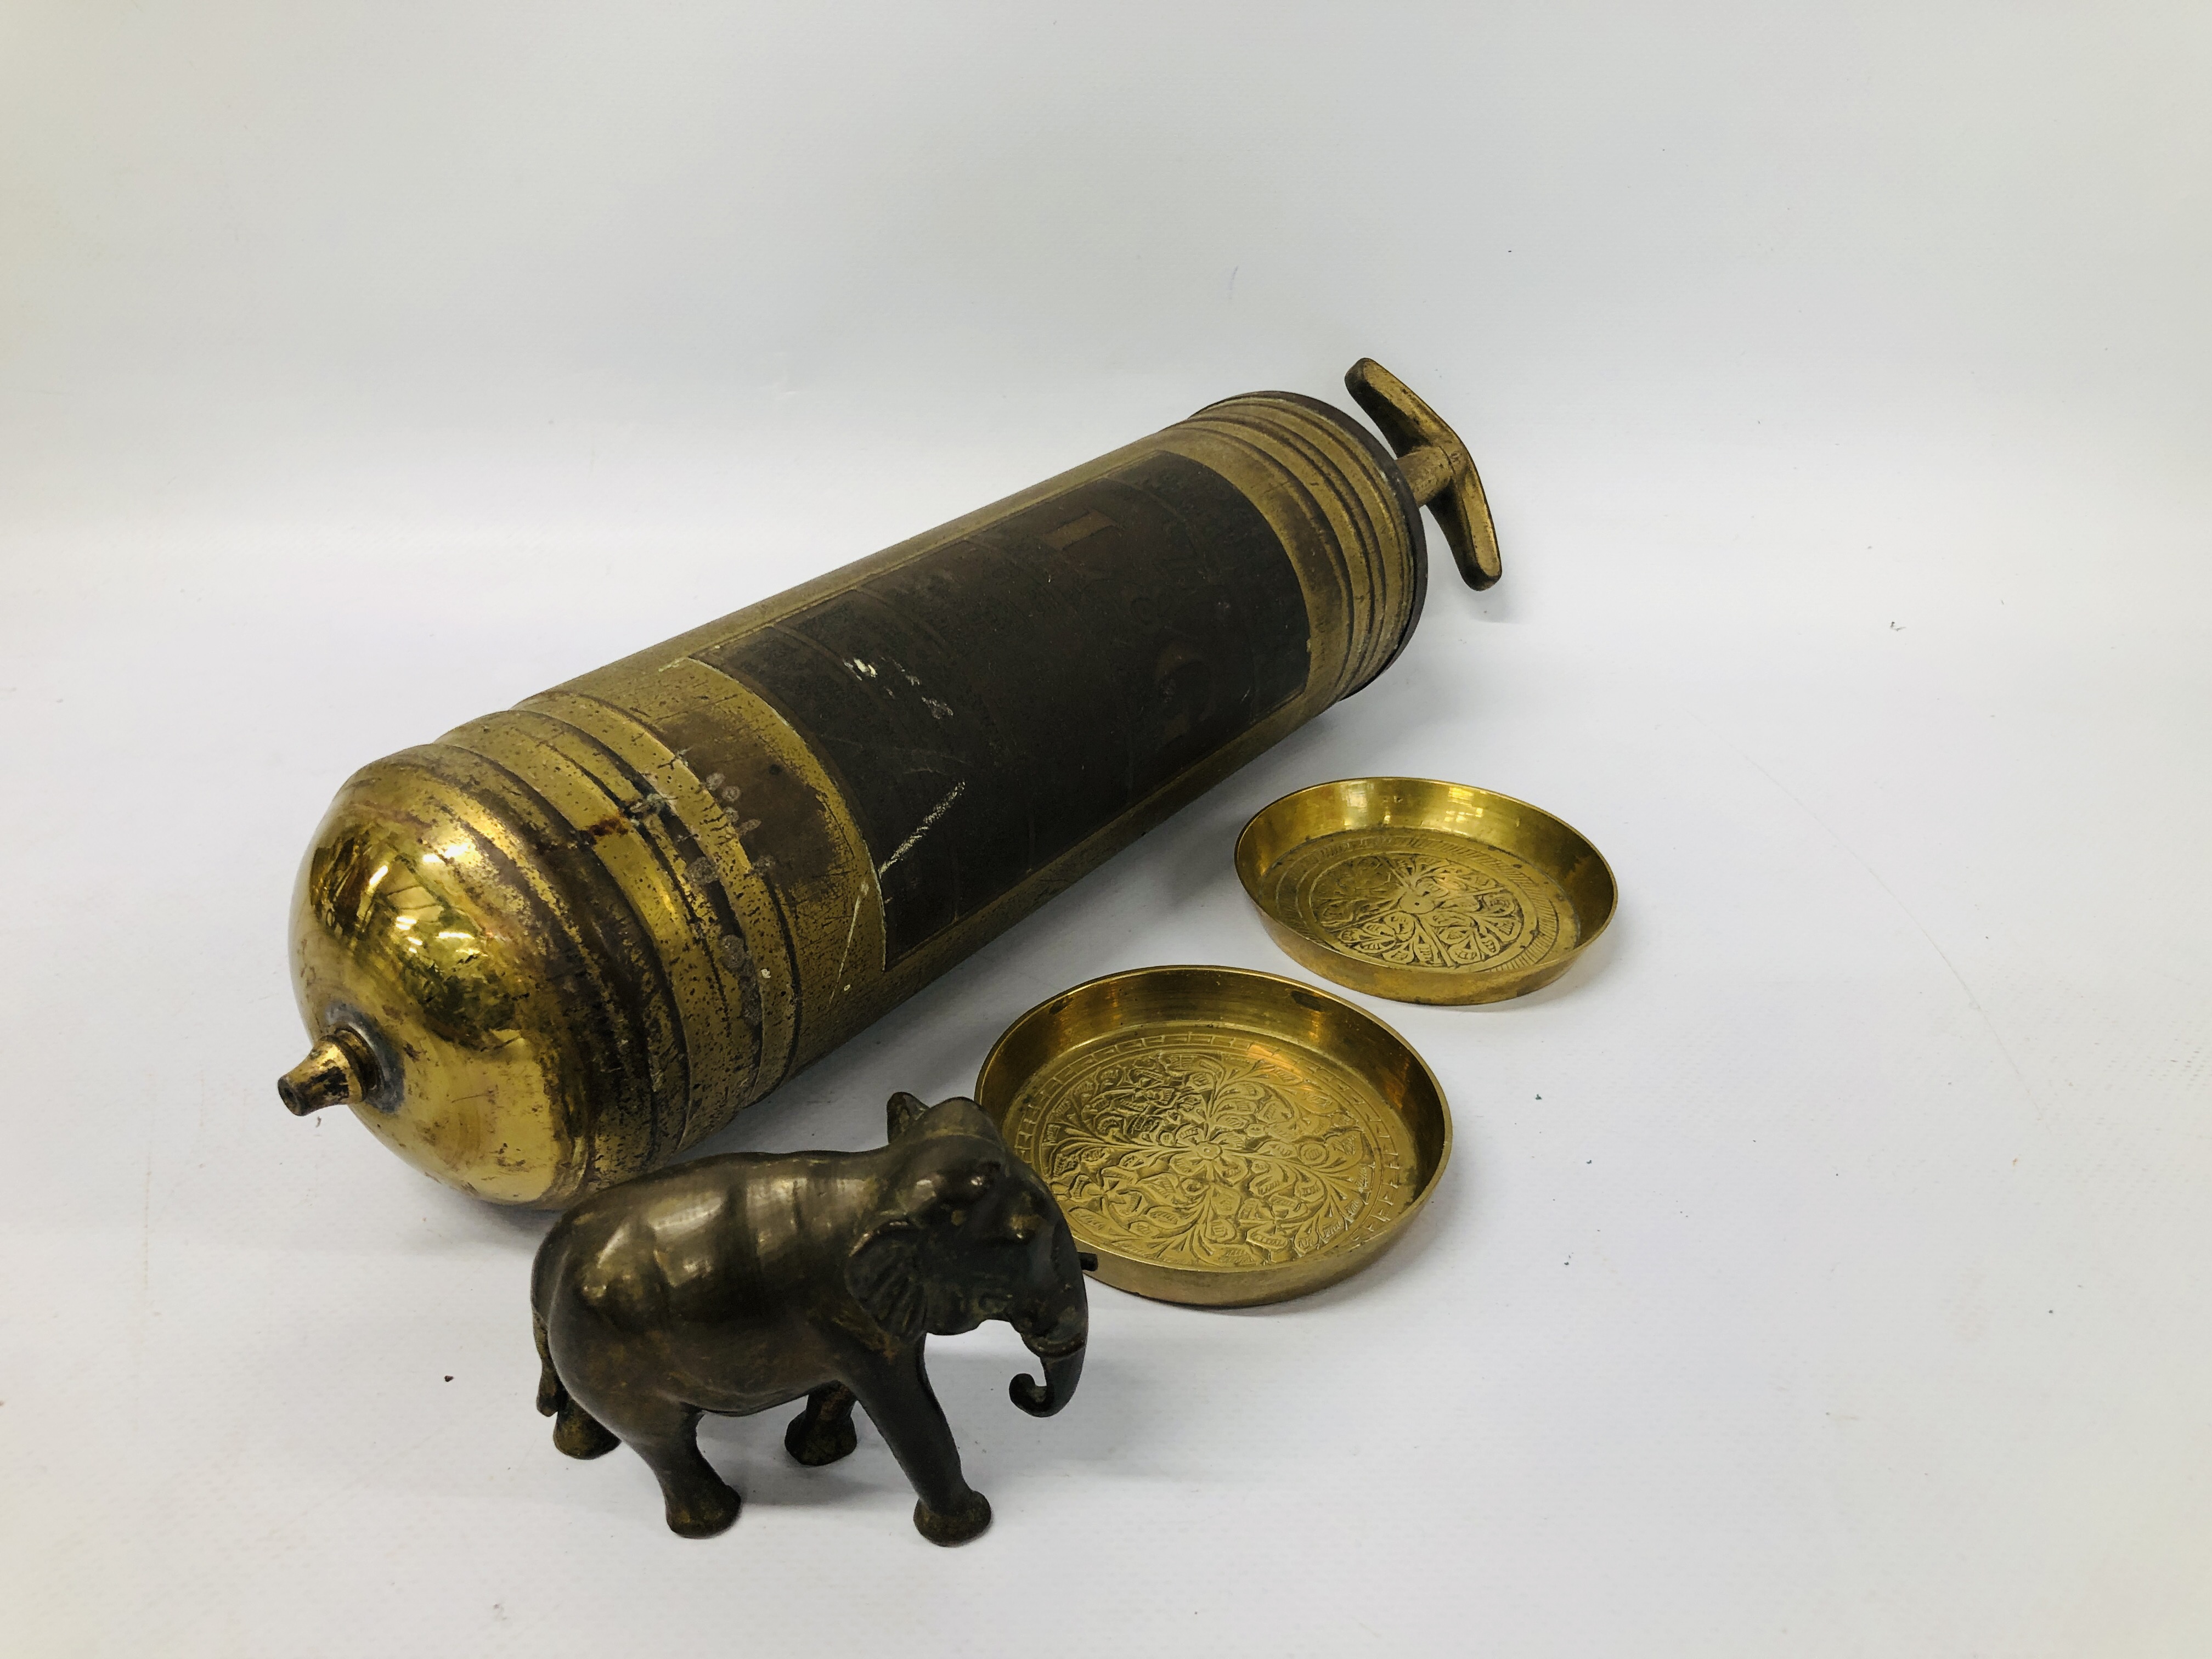 MIXED BRASS AND COPPER TO INCLUDE OIL LAMPS, LAMPS, STOVE, TRIVET, WATERING CAN, SCALES, CUPS, - Image 13 of 27